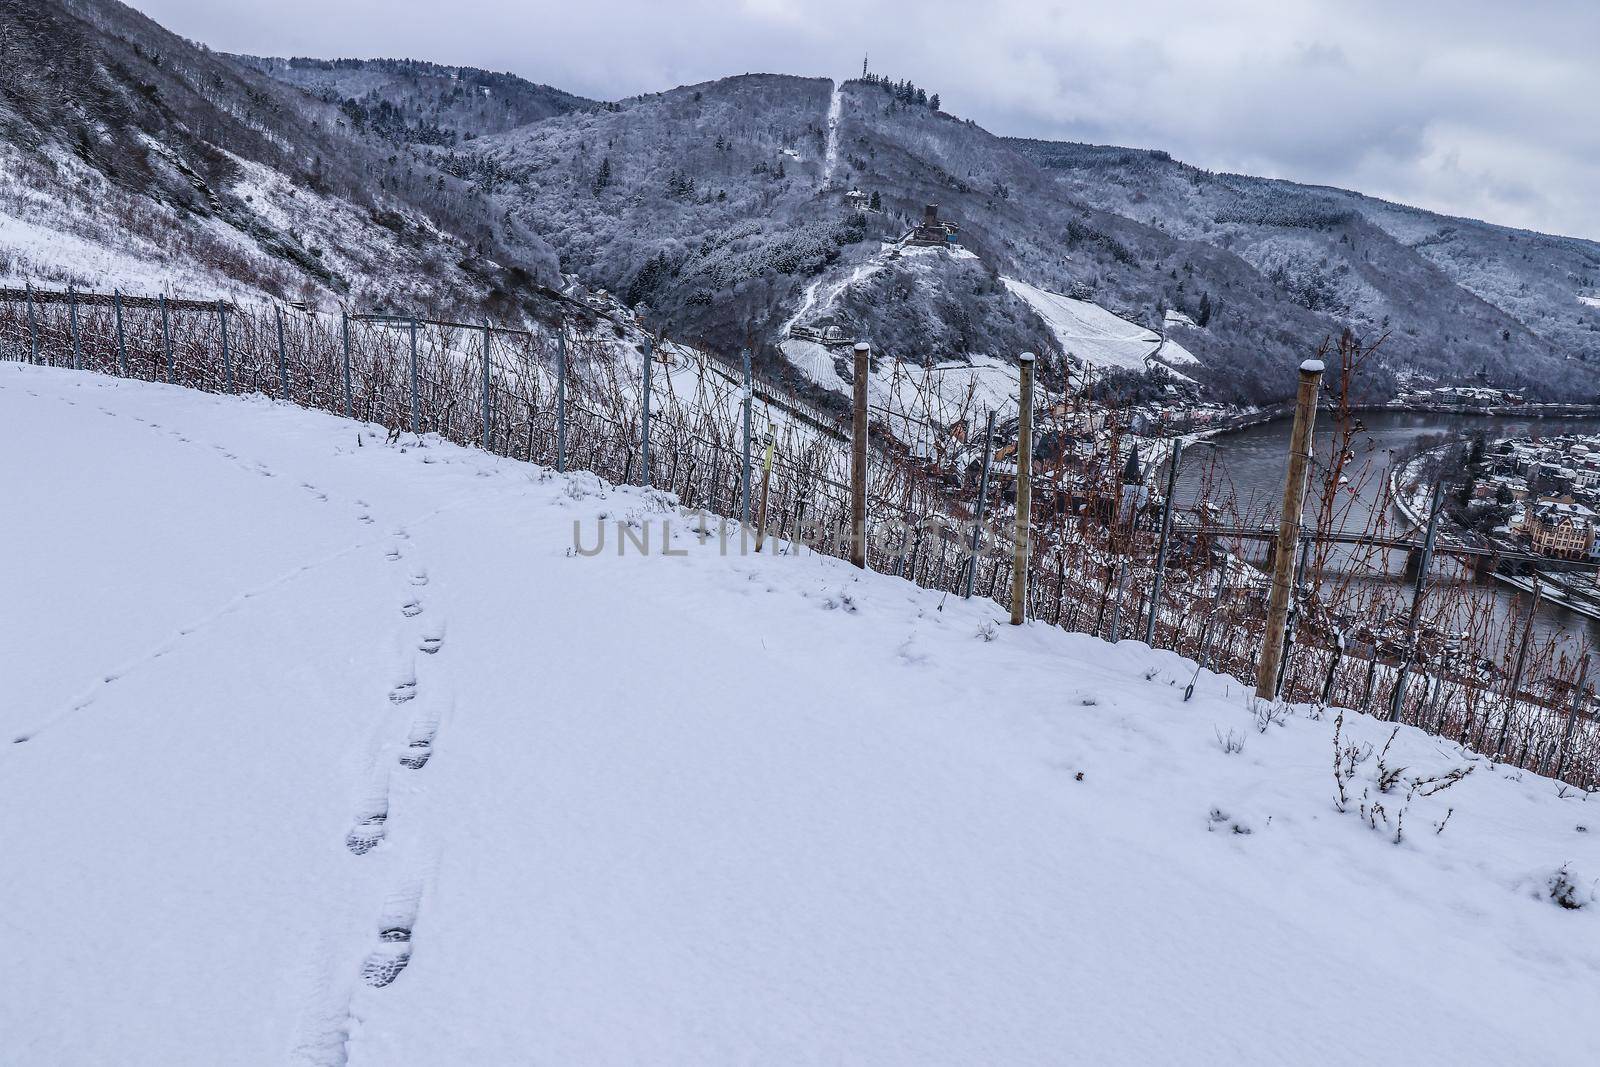 Foot prints on the snow leading to the vineyard by Sonnet15